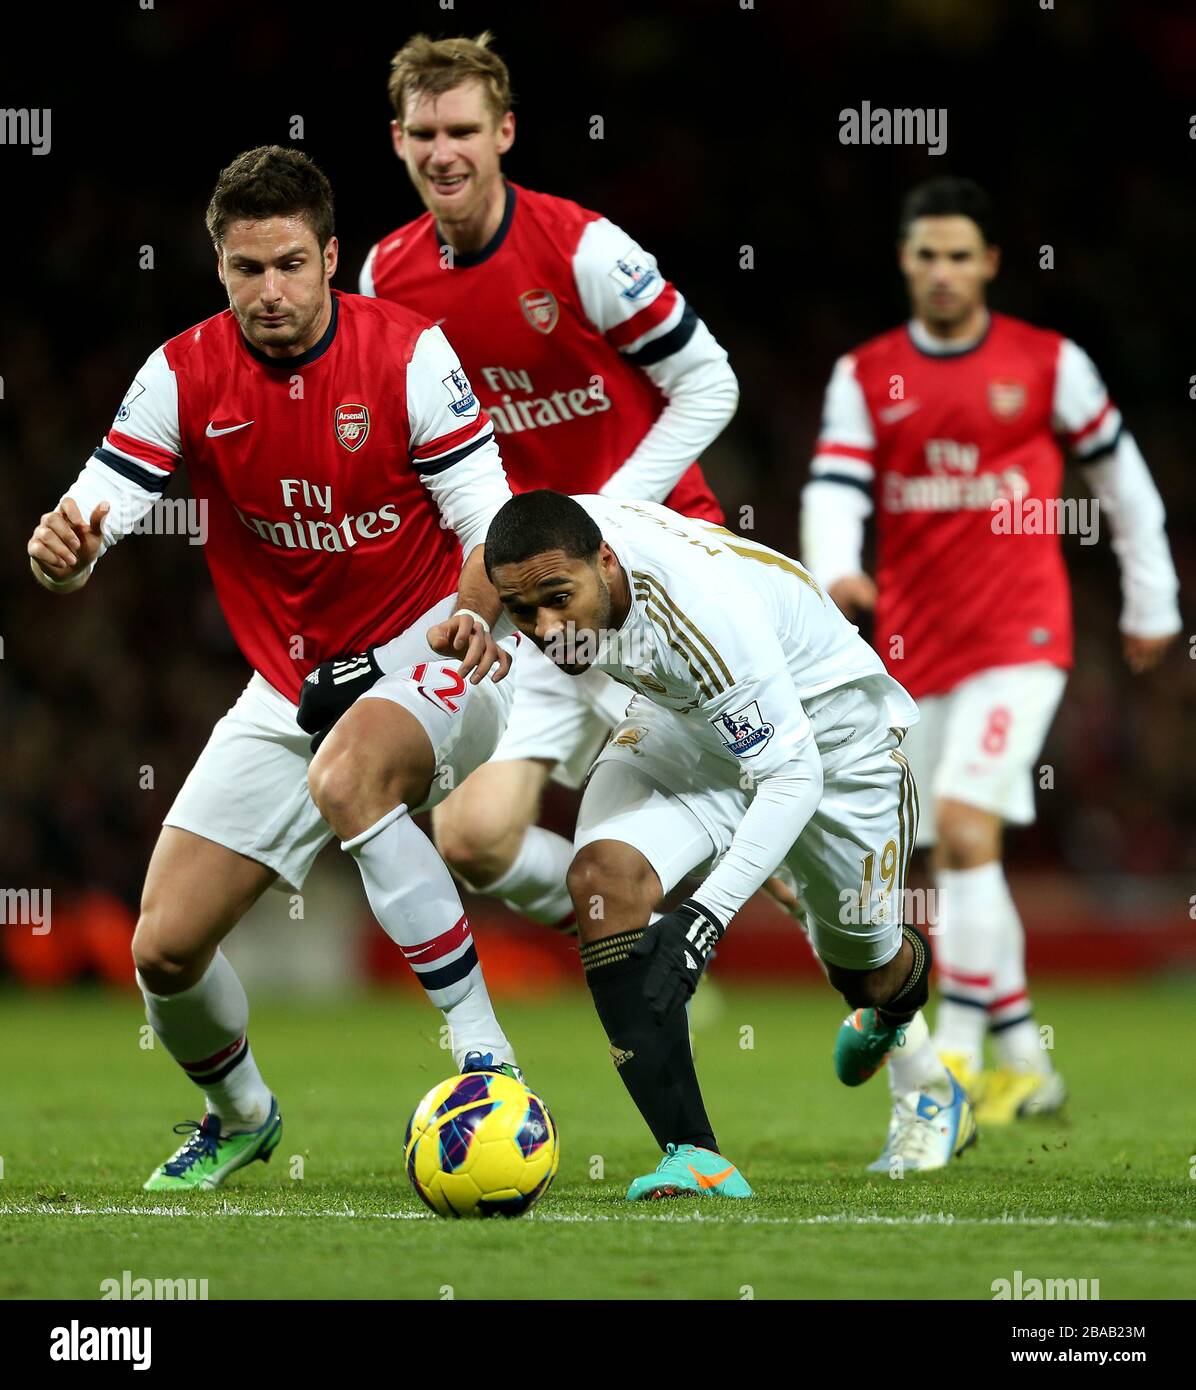 Swansea City's Luke Moore fights for the ball with Arsenal's Olivier Giroud Stock Photo